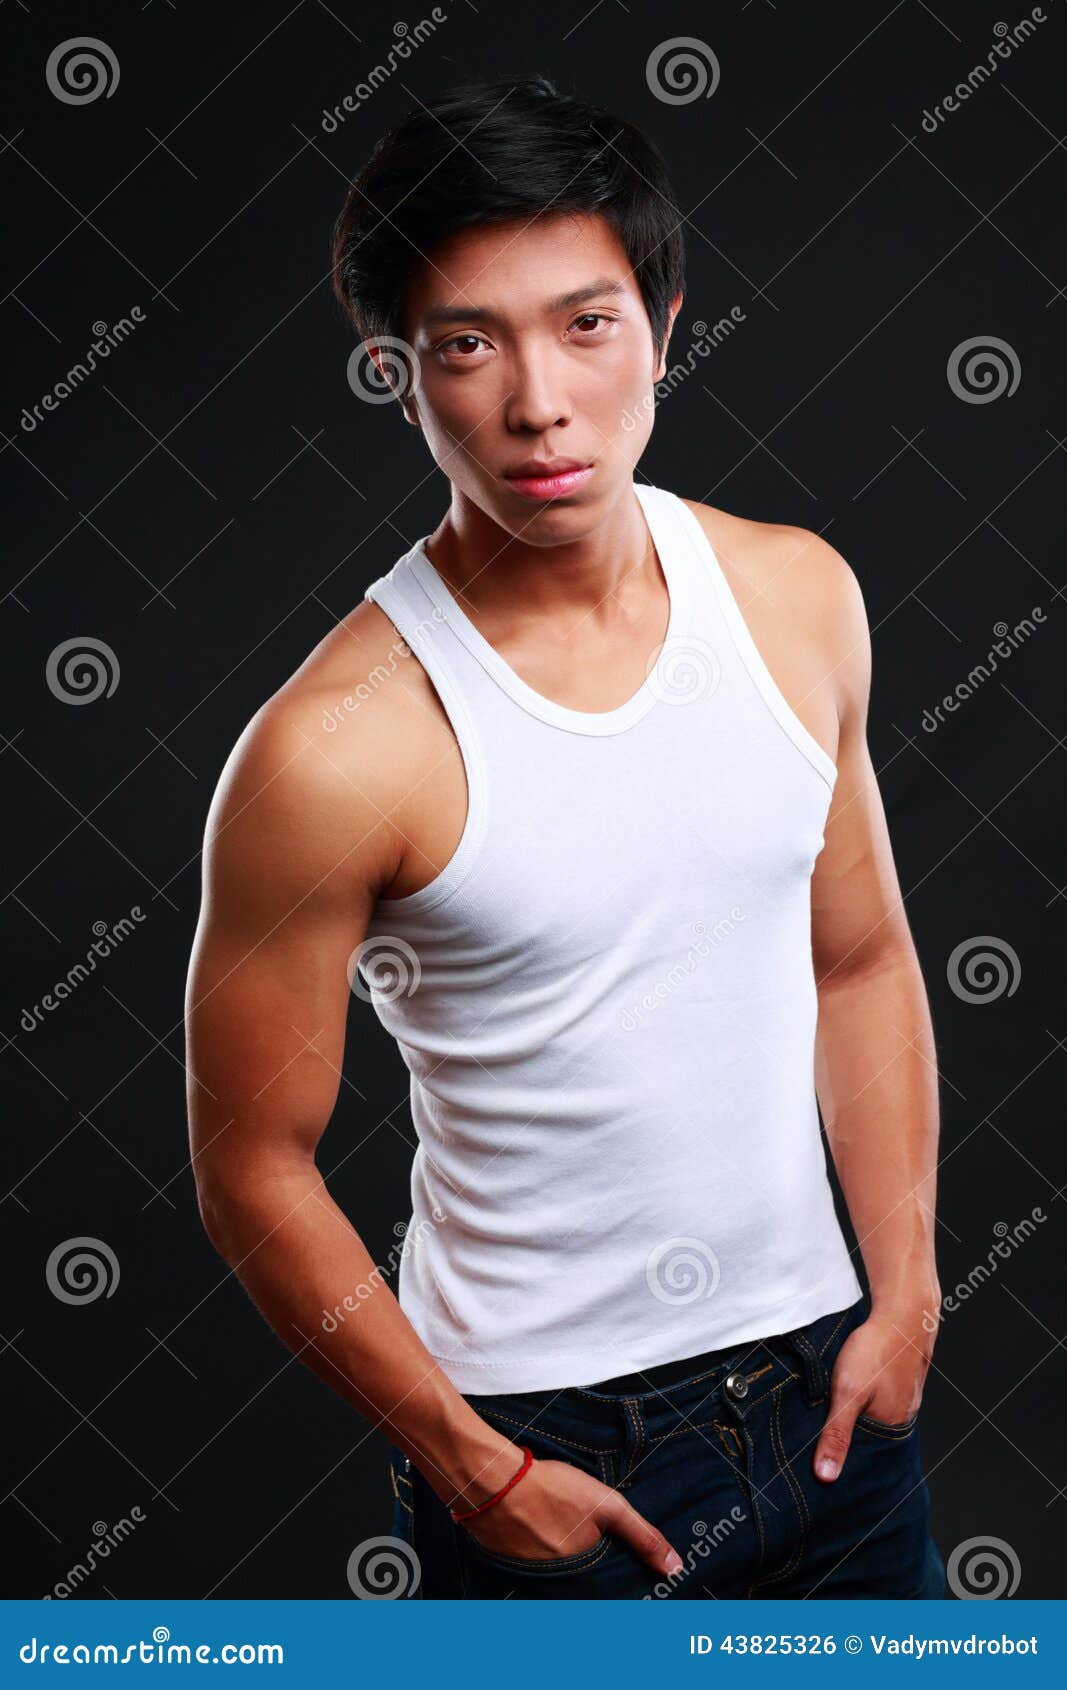 Portrait of a Serious Muscular Asian Man Stock Photo - Image of model ...